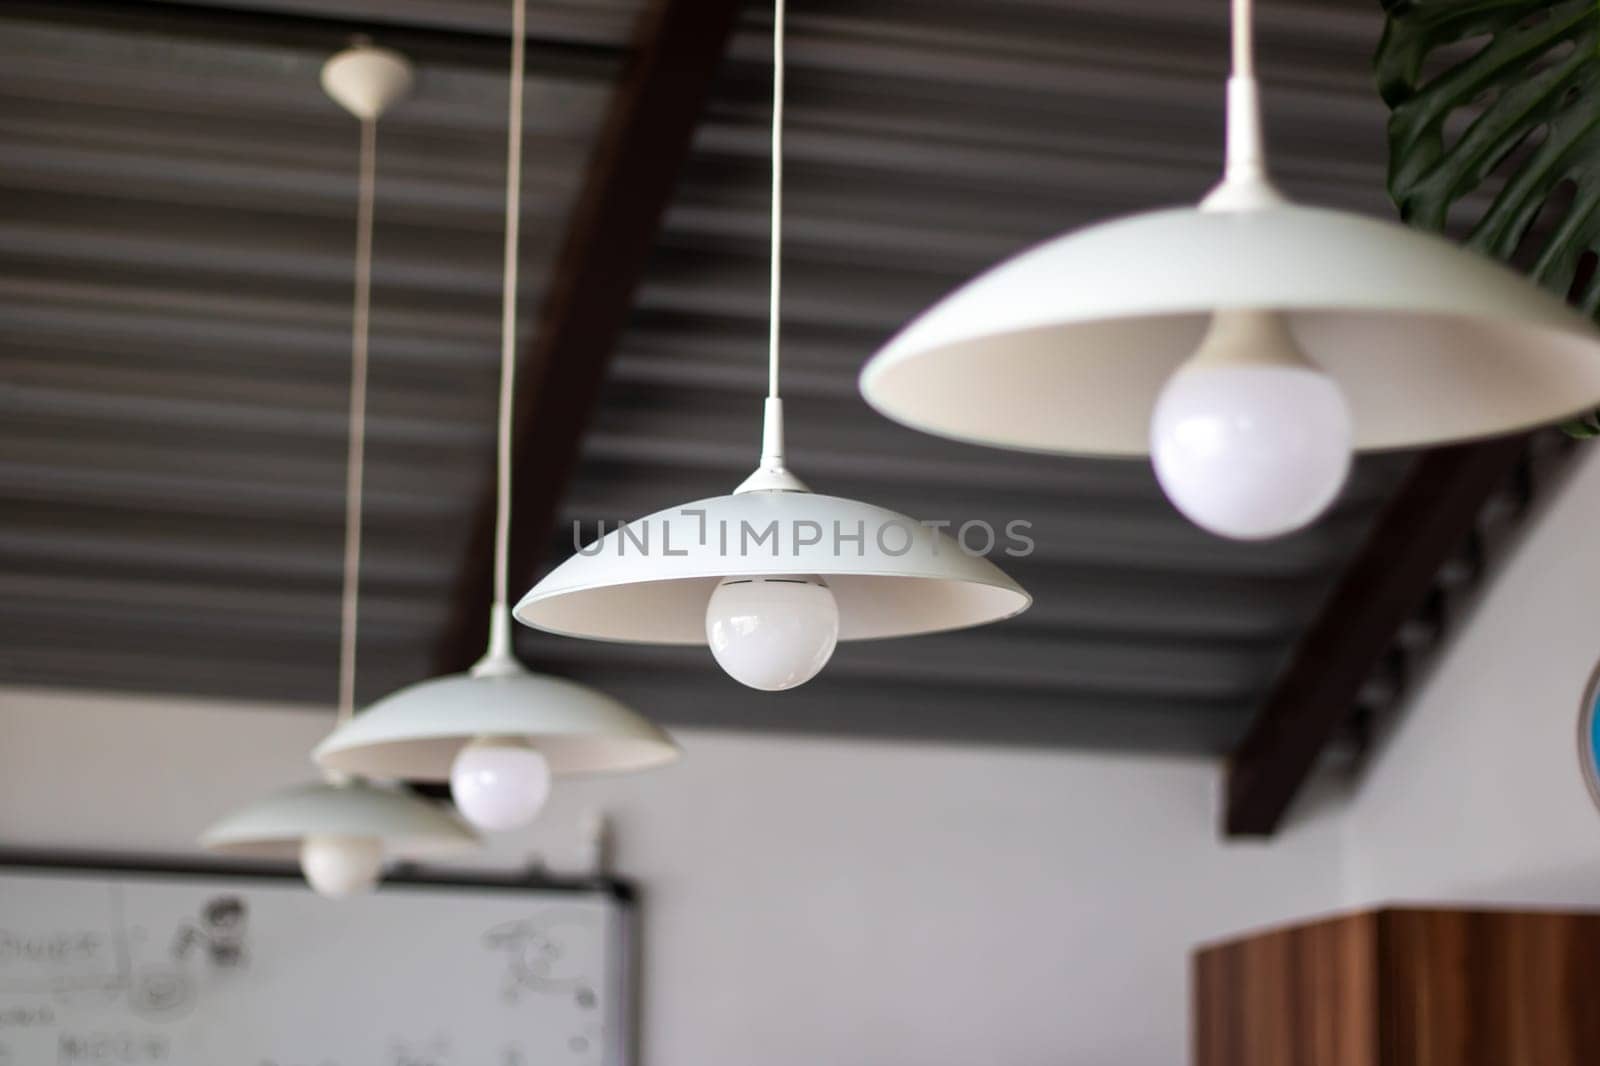 Three elegant pendant lights, white in color, dangle gracefully from the ceiling, adding a touch of sophistication to the room